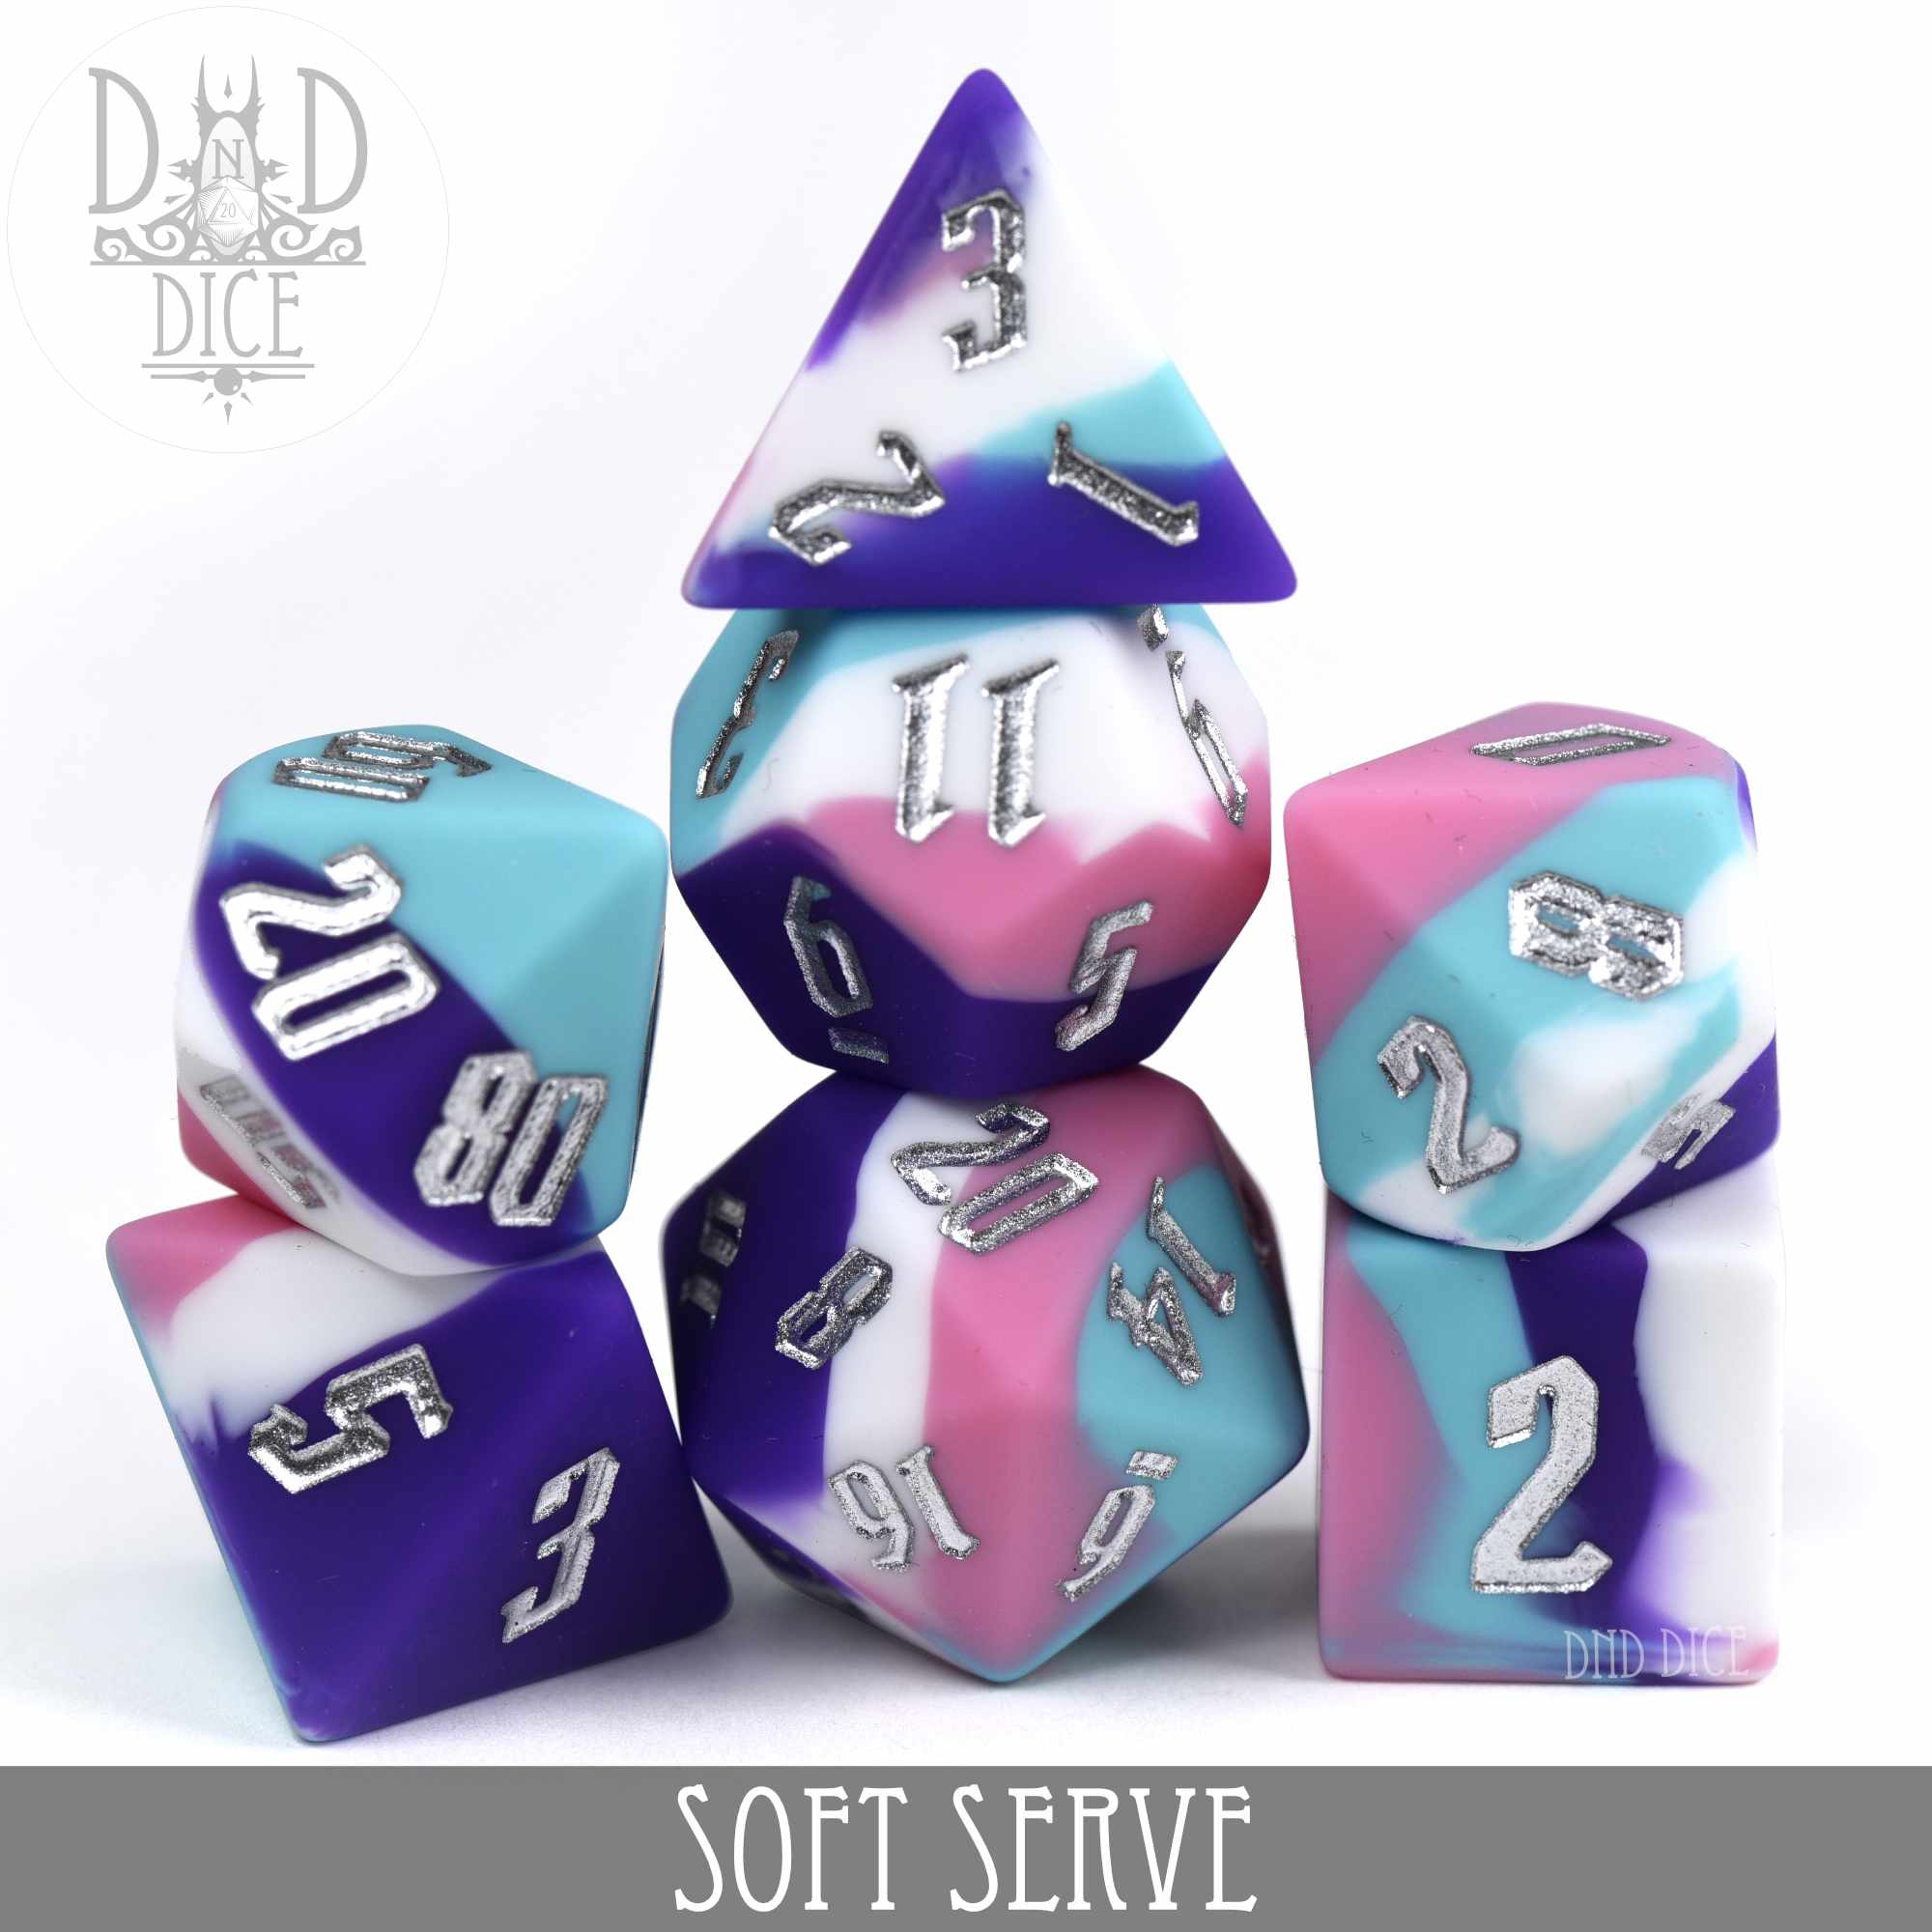 Dungeons and Dragons Gamer Dice / Die Mold Silicone Rubber D4, D6, D8, D10,  D12, D20, D100 -  Israel